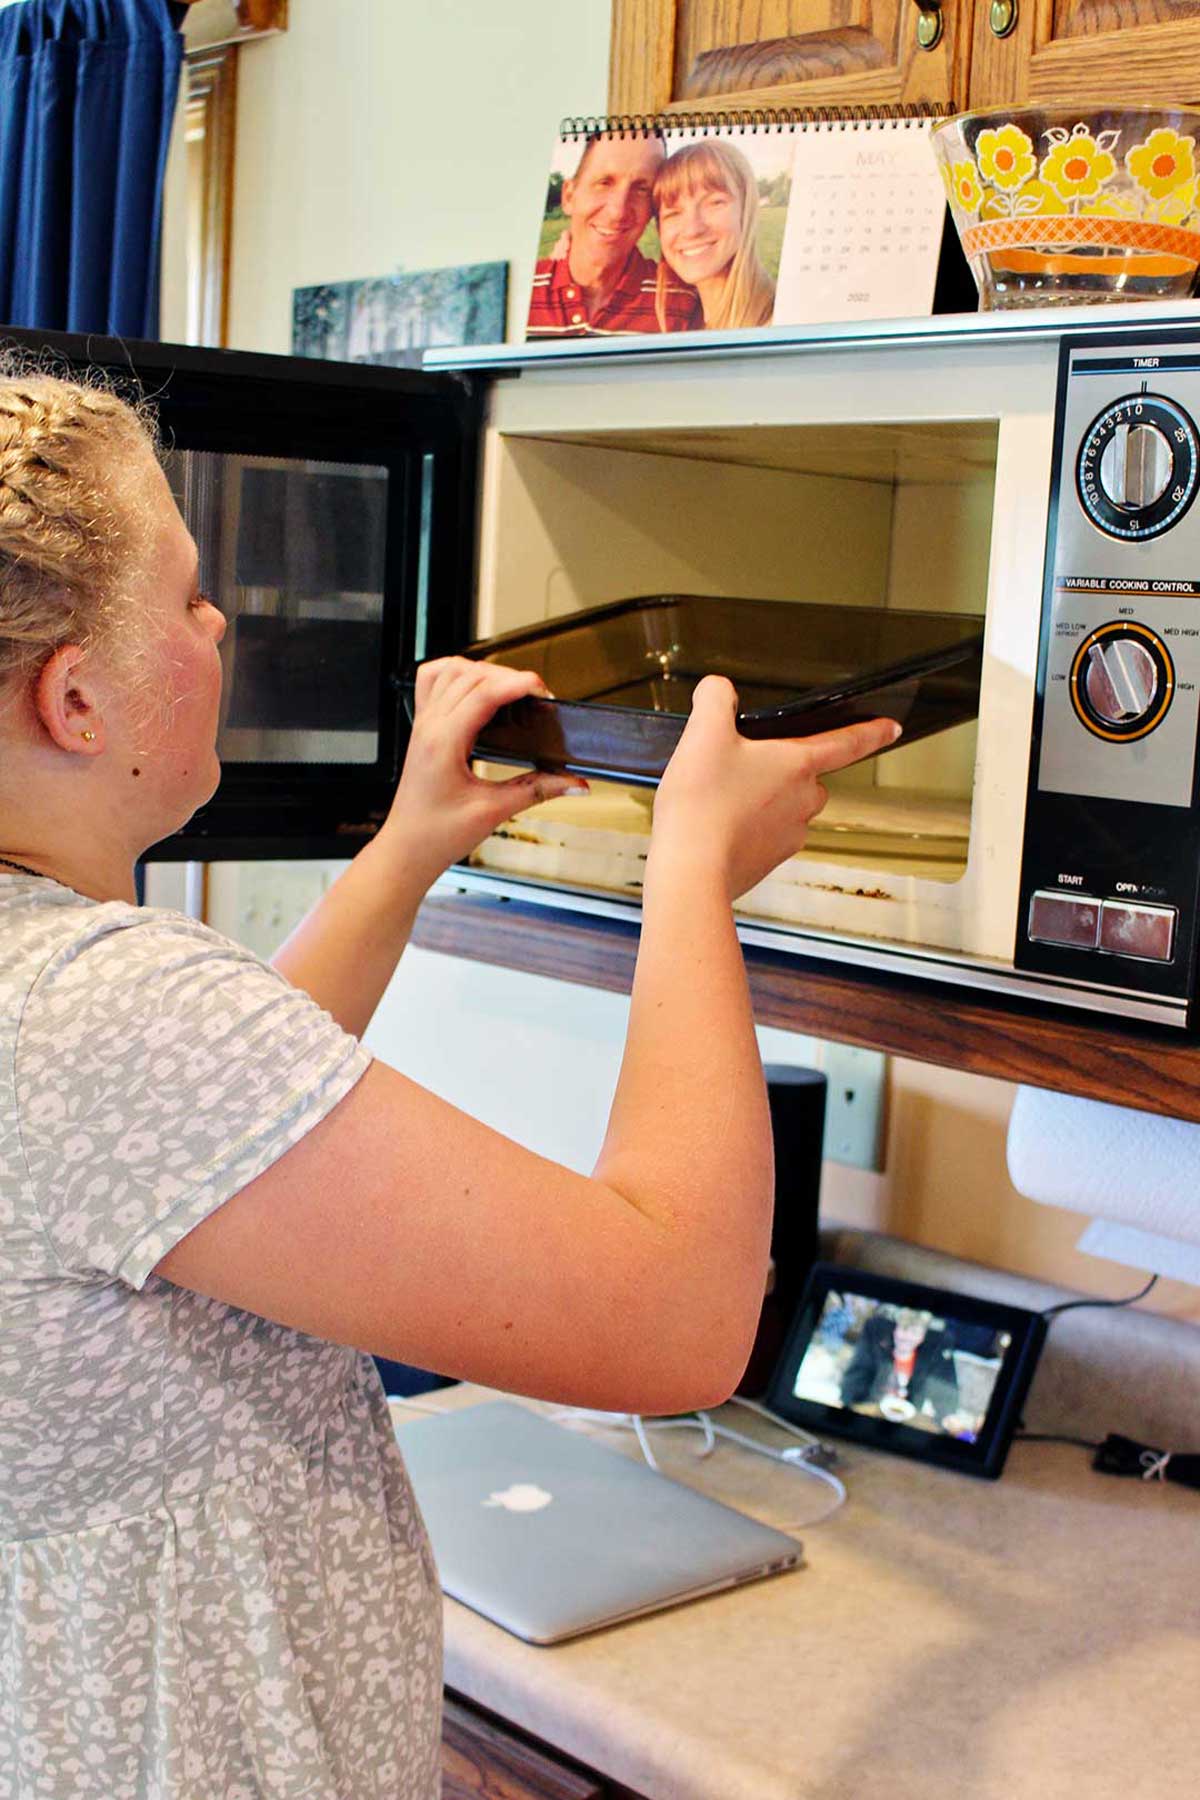 A girl placing a glass pan in a microwave.